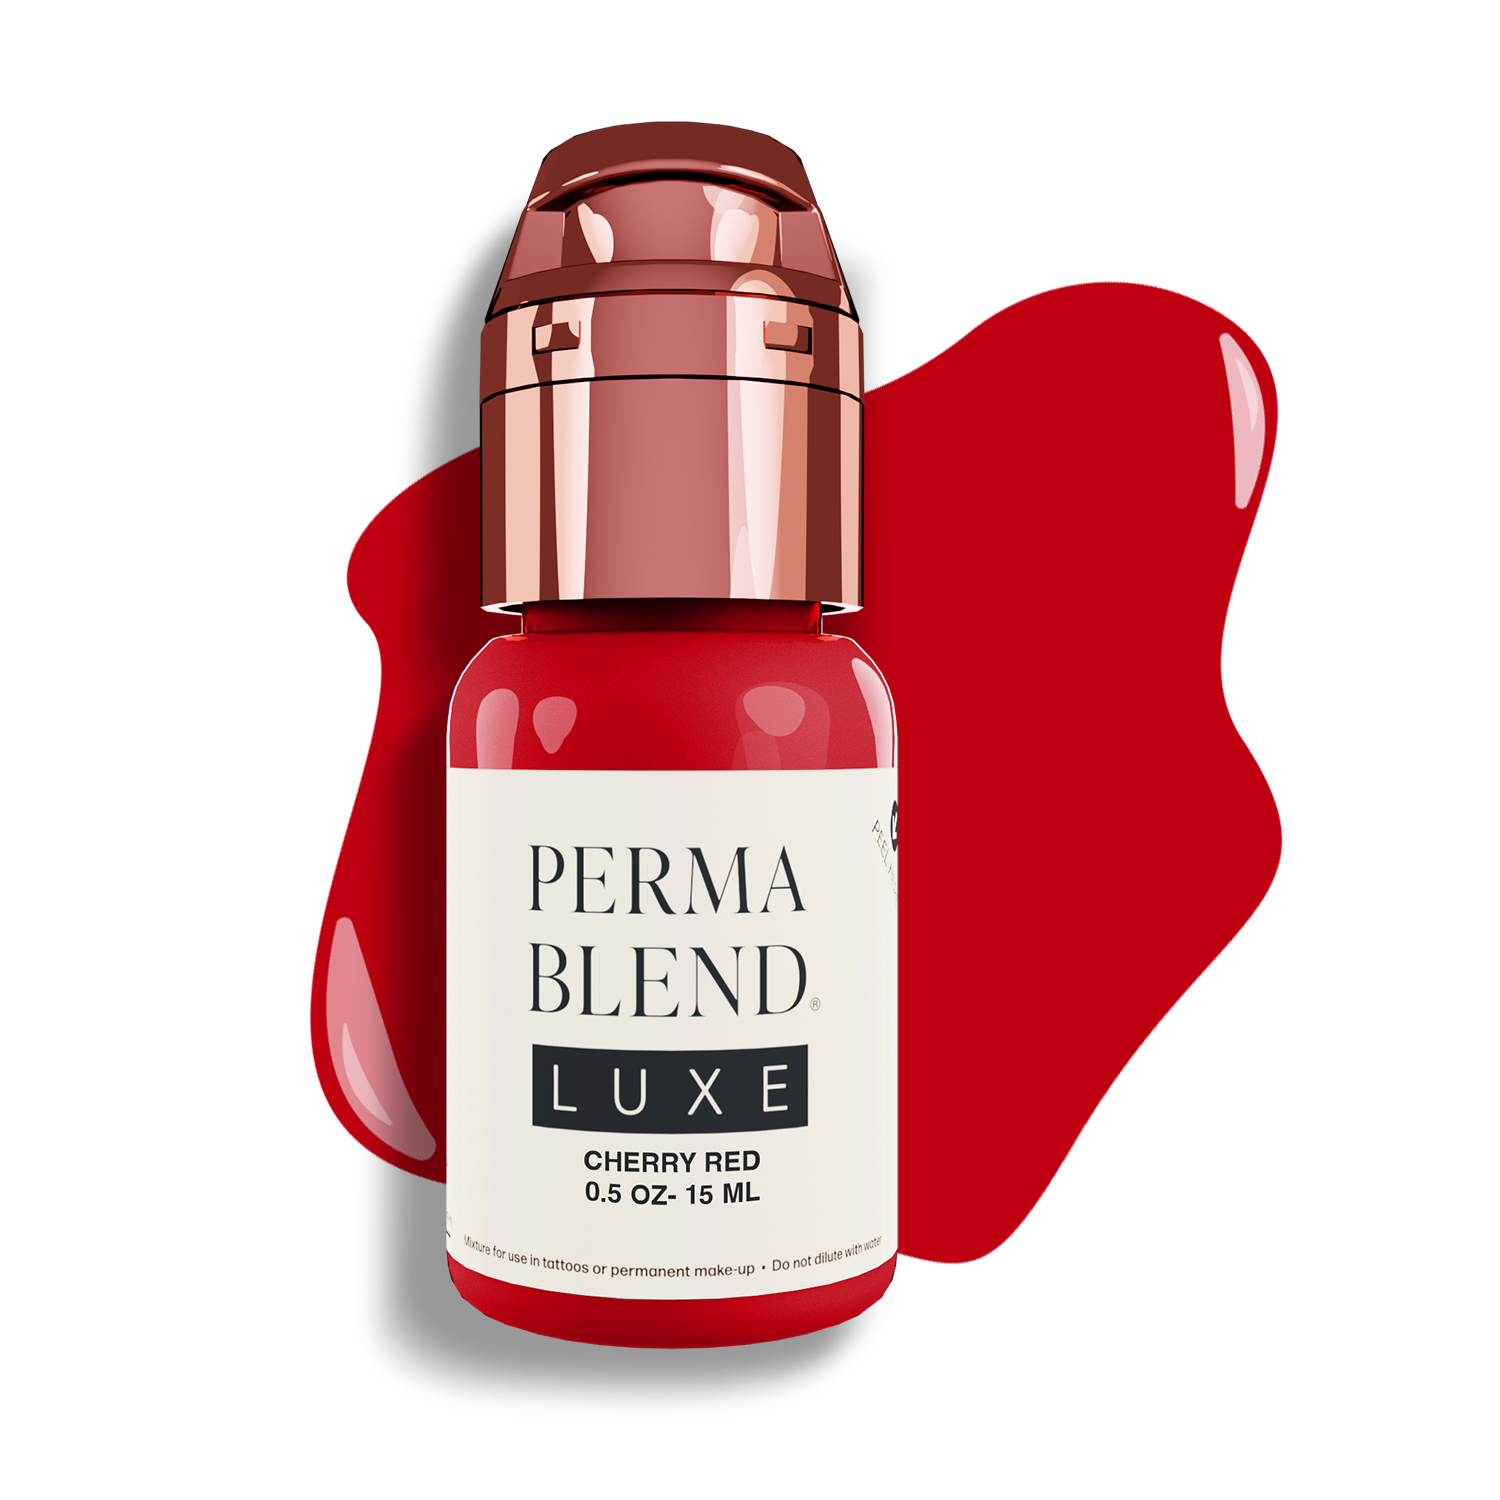 Perma Blend Luxe PMU Ink | Cherry Red | Lips